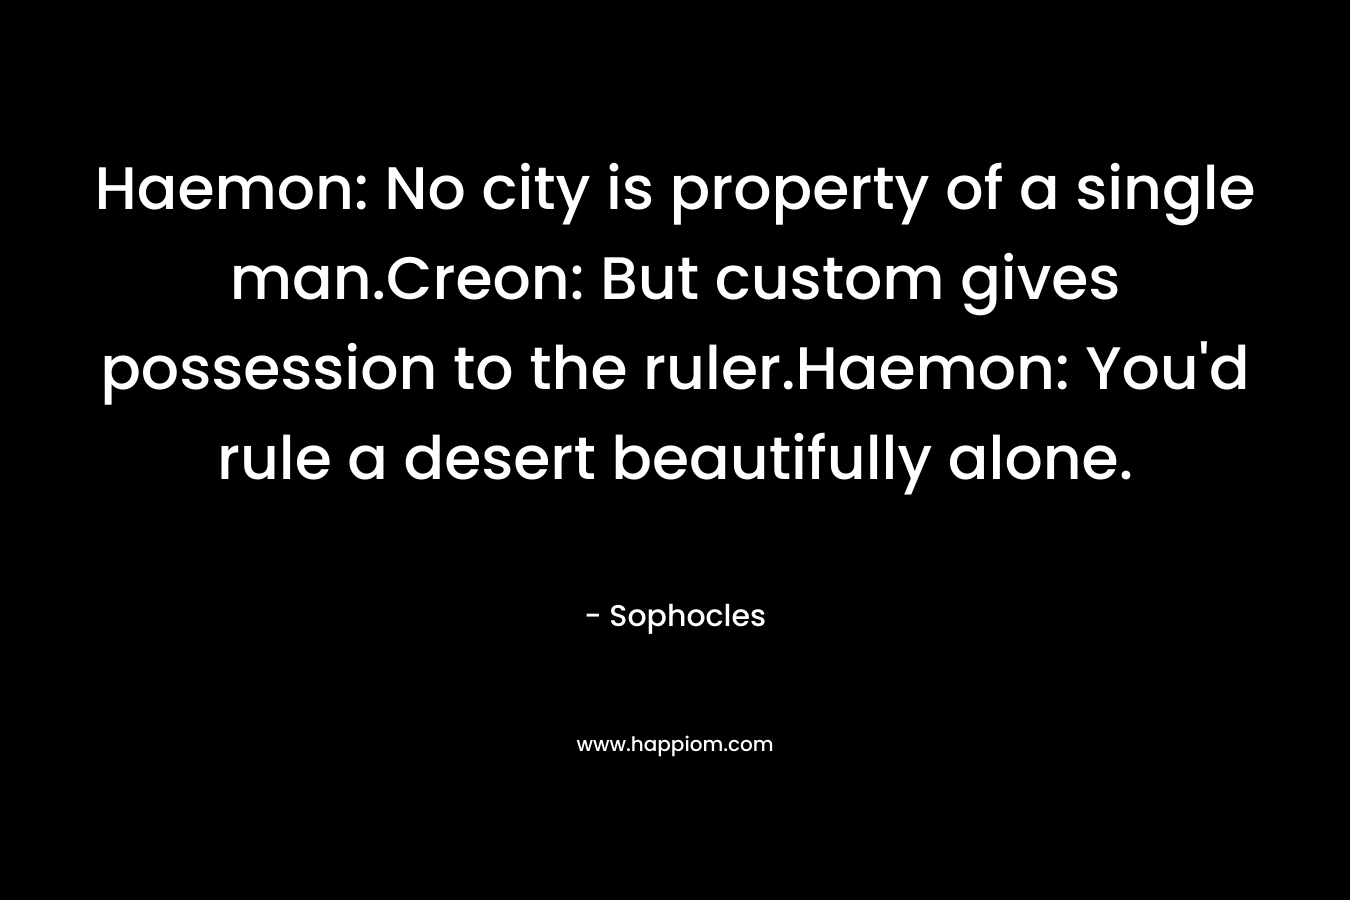 Haemon: No city is property of a single man.Creon: But custom gives possession to the ruler.Haemon: You’d rule a desert beautifully alone. – Sophocles